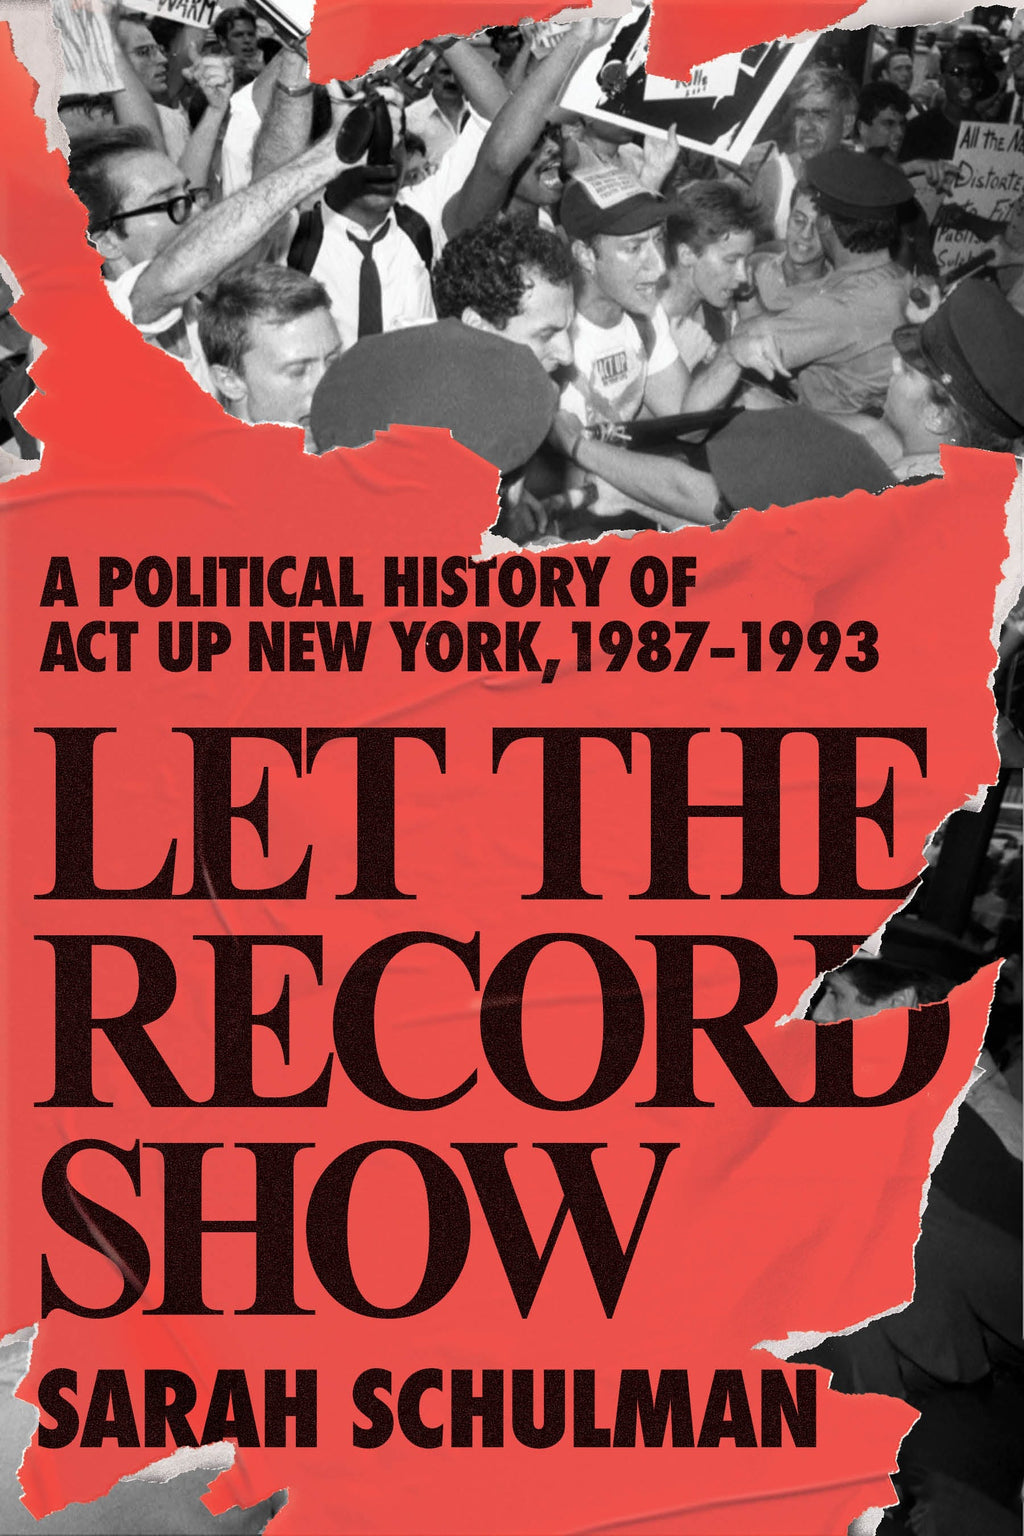 Let the Record Show: A Political History of ACT UP New York, 1987–1993 by Sarah Schulman